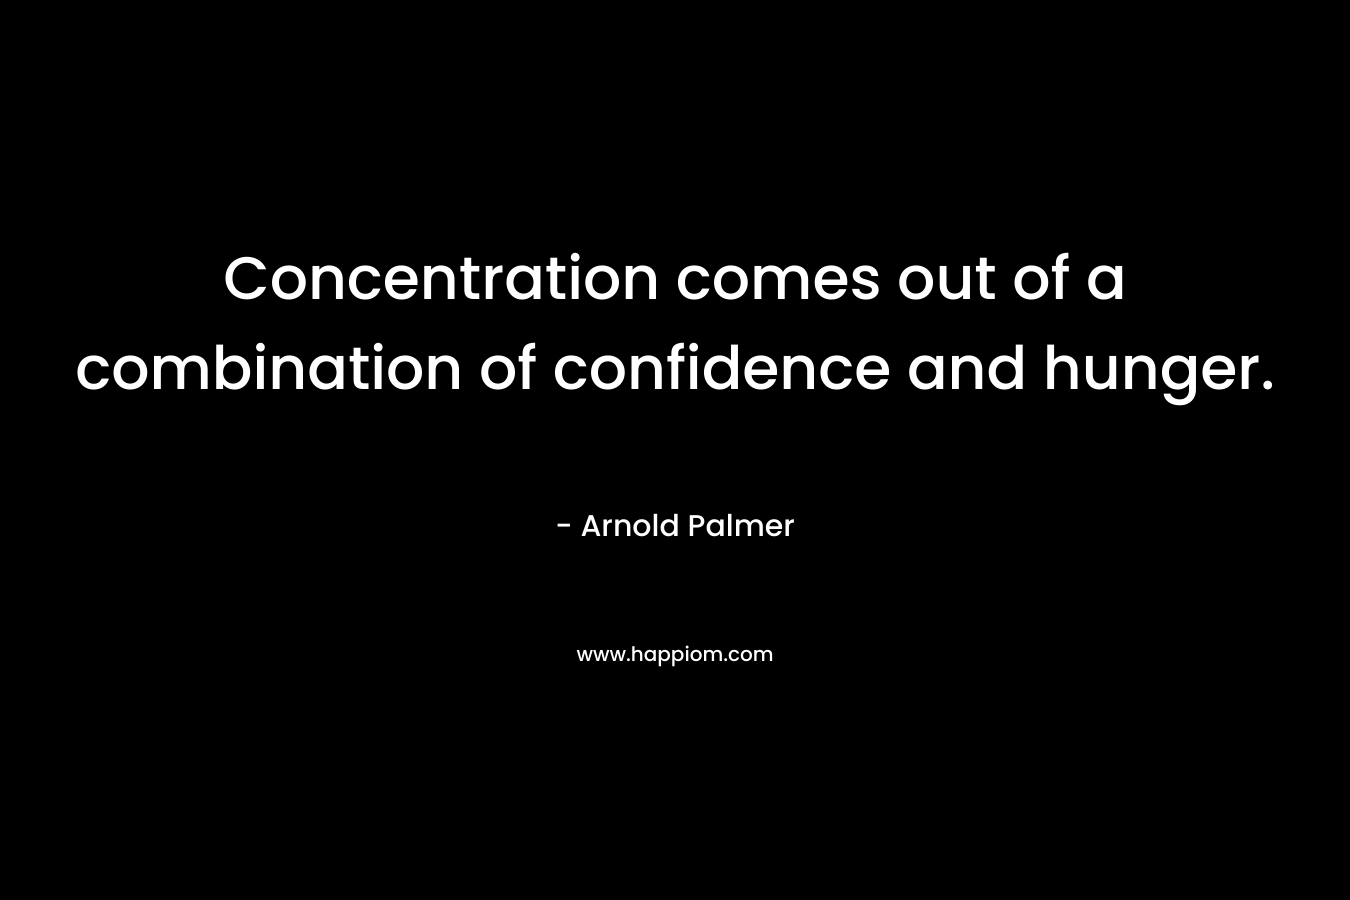 Concentration comes out of a combination of confidence and hunger. – Arnold Palmer